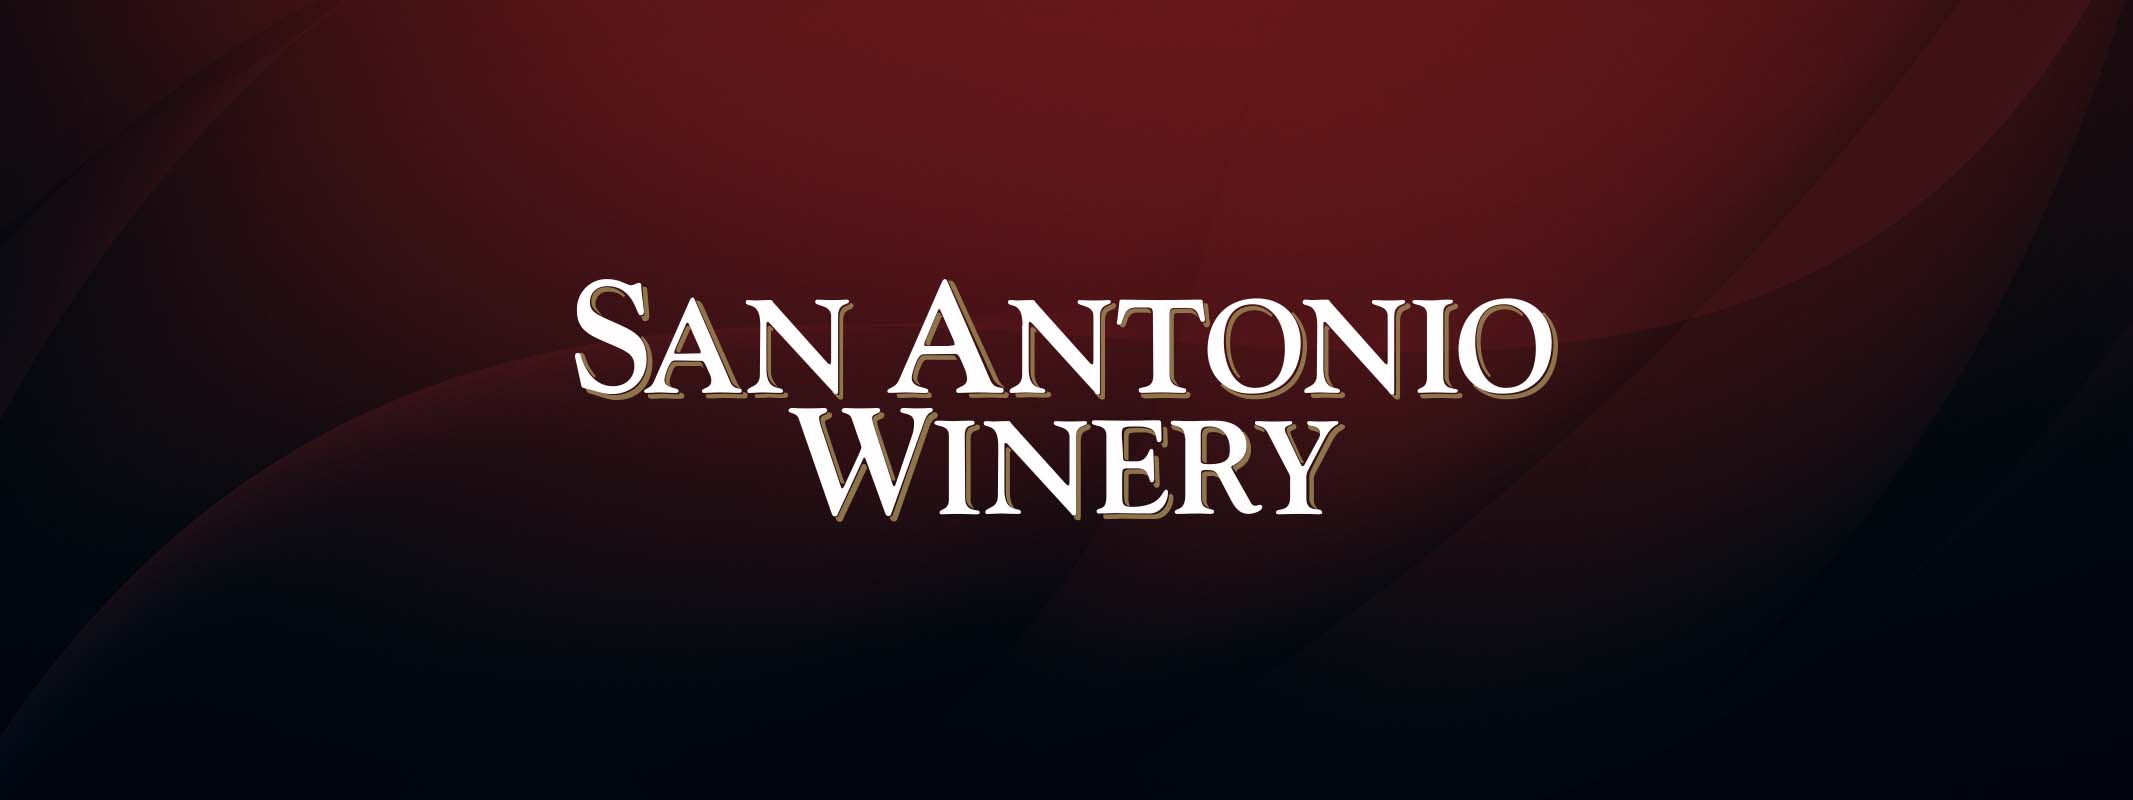 San Antonio Winery logo superimposed over a styled background 